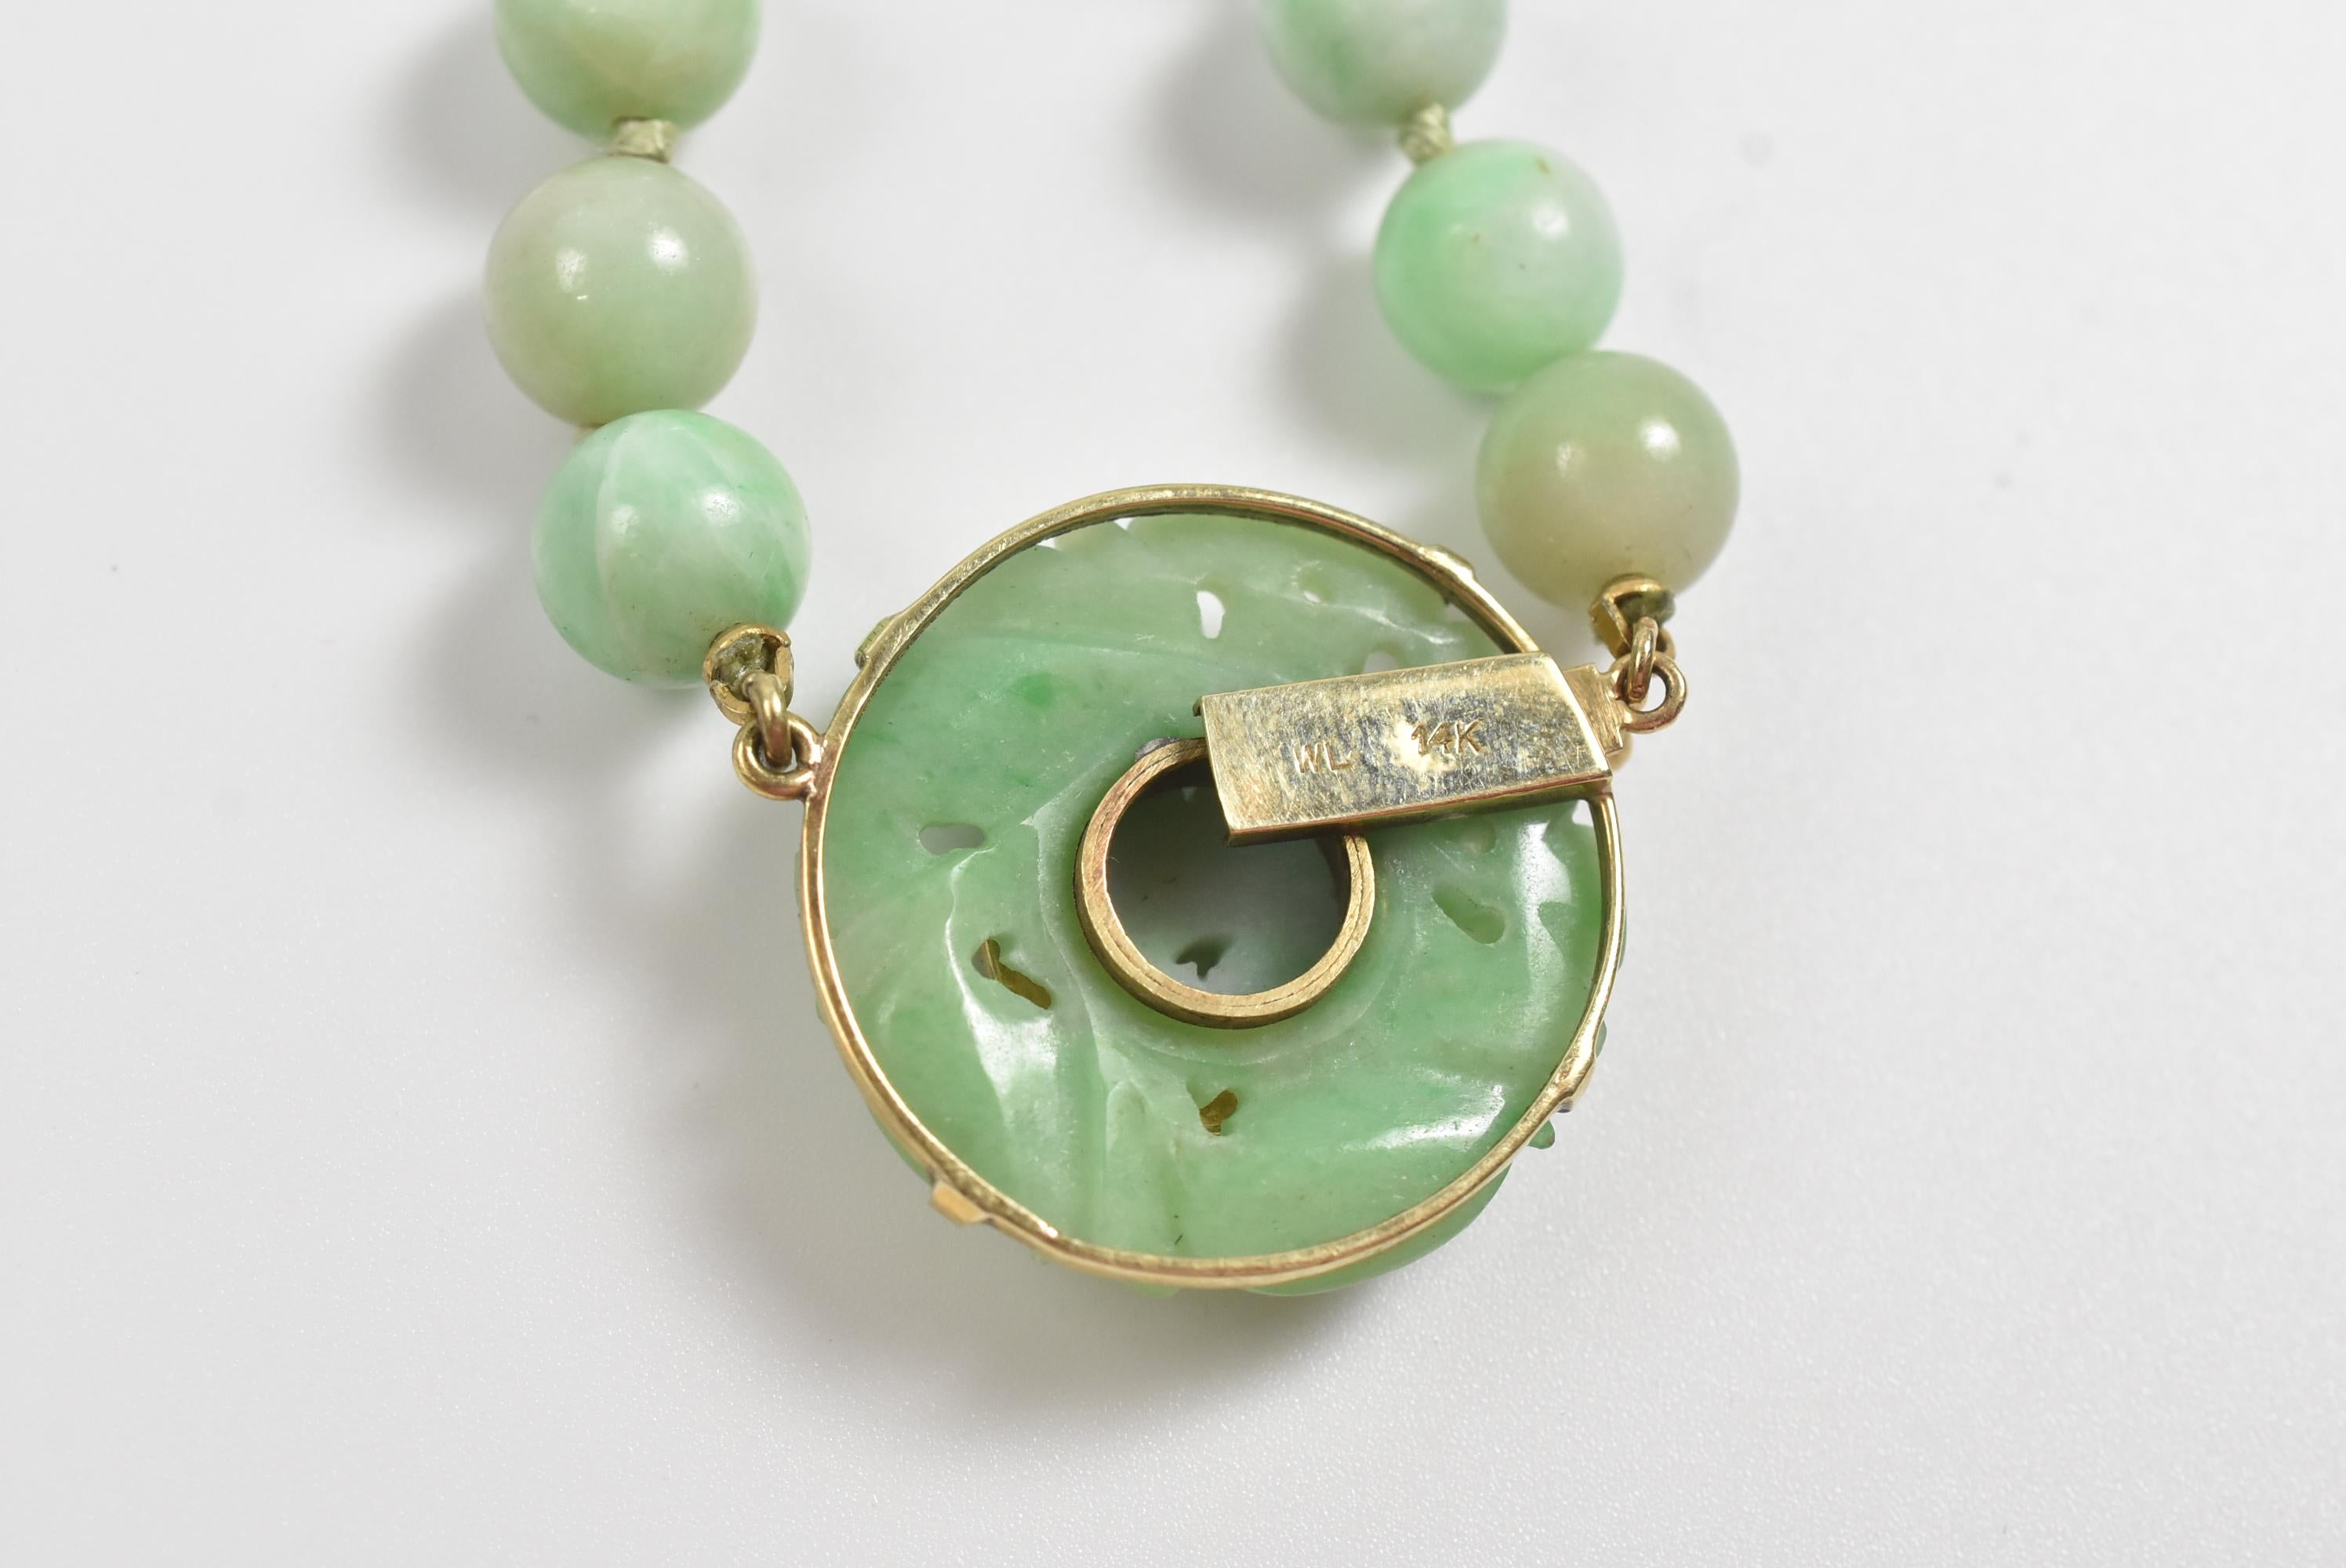 Hand-Carved Walter Lampl Carved Jade Necklace 14-Karat Gold Setting, circa 1920s